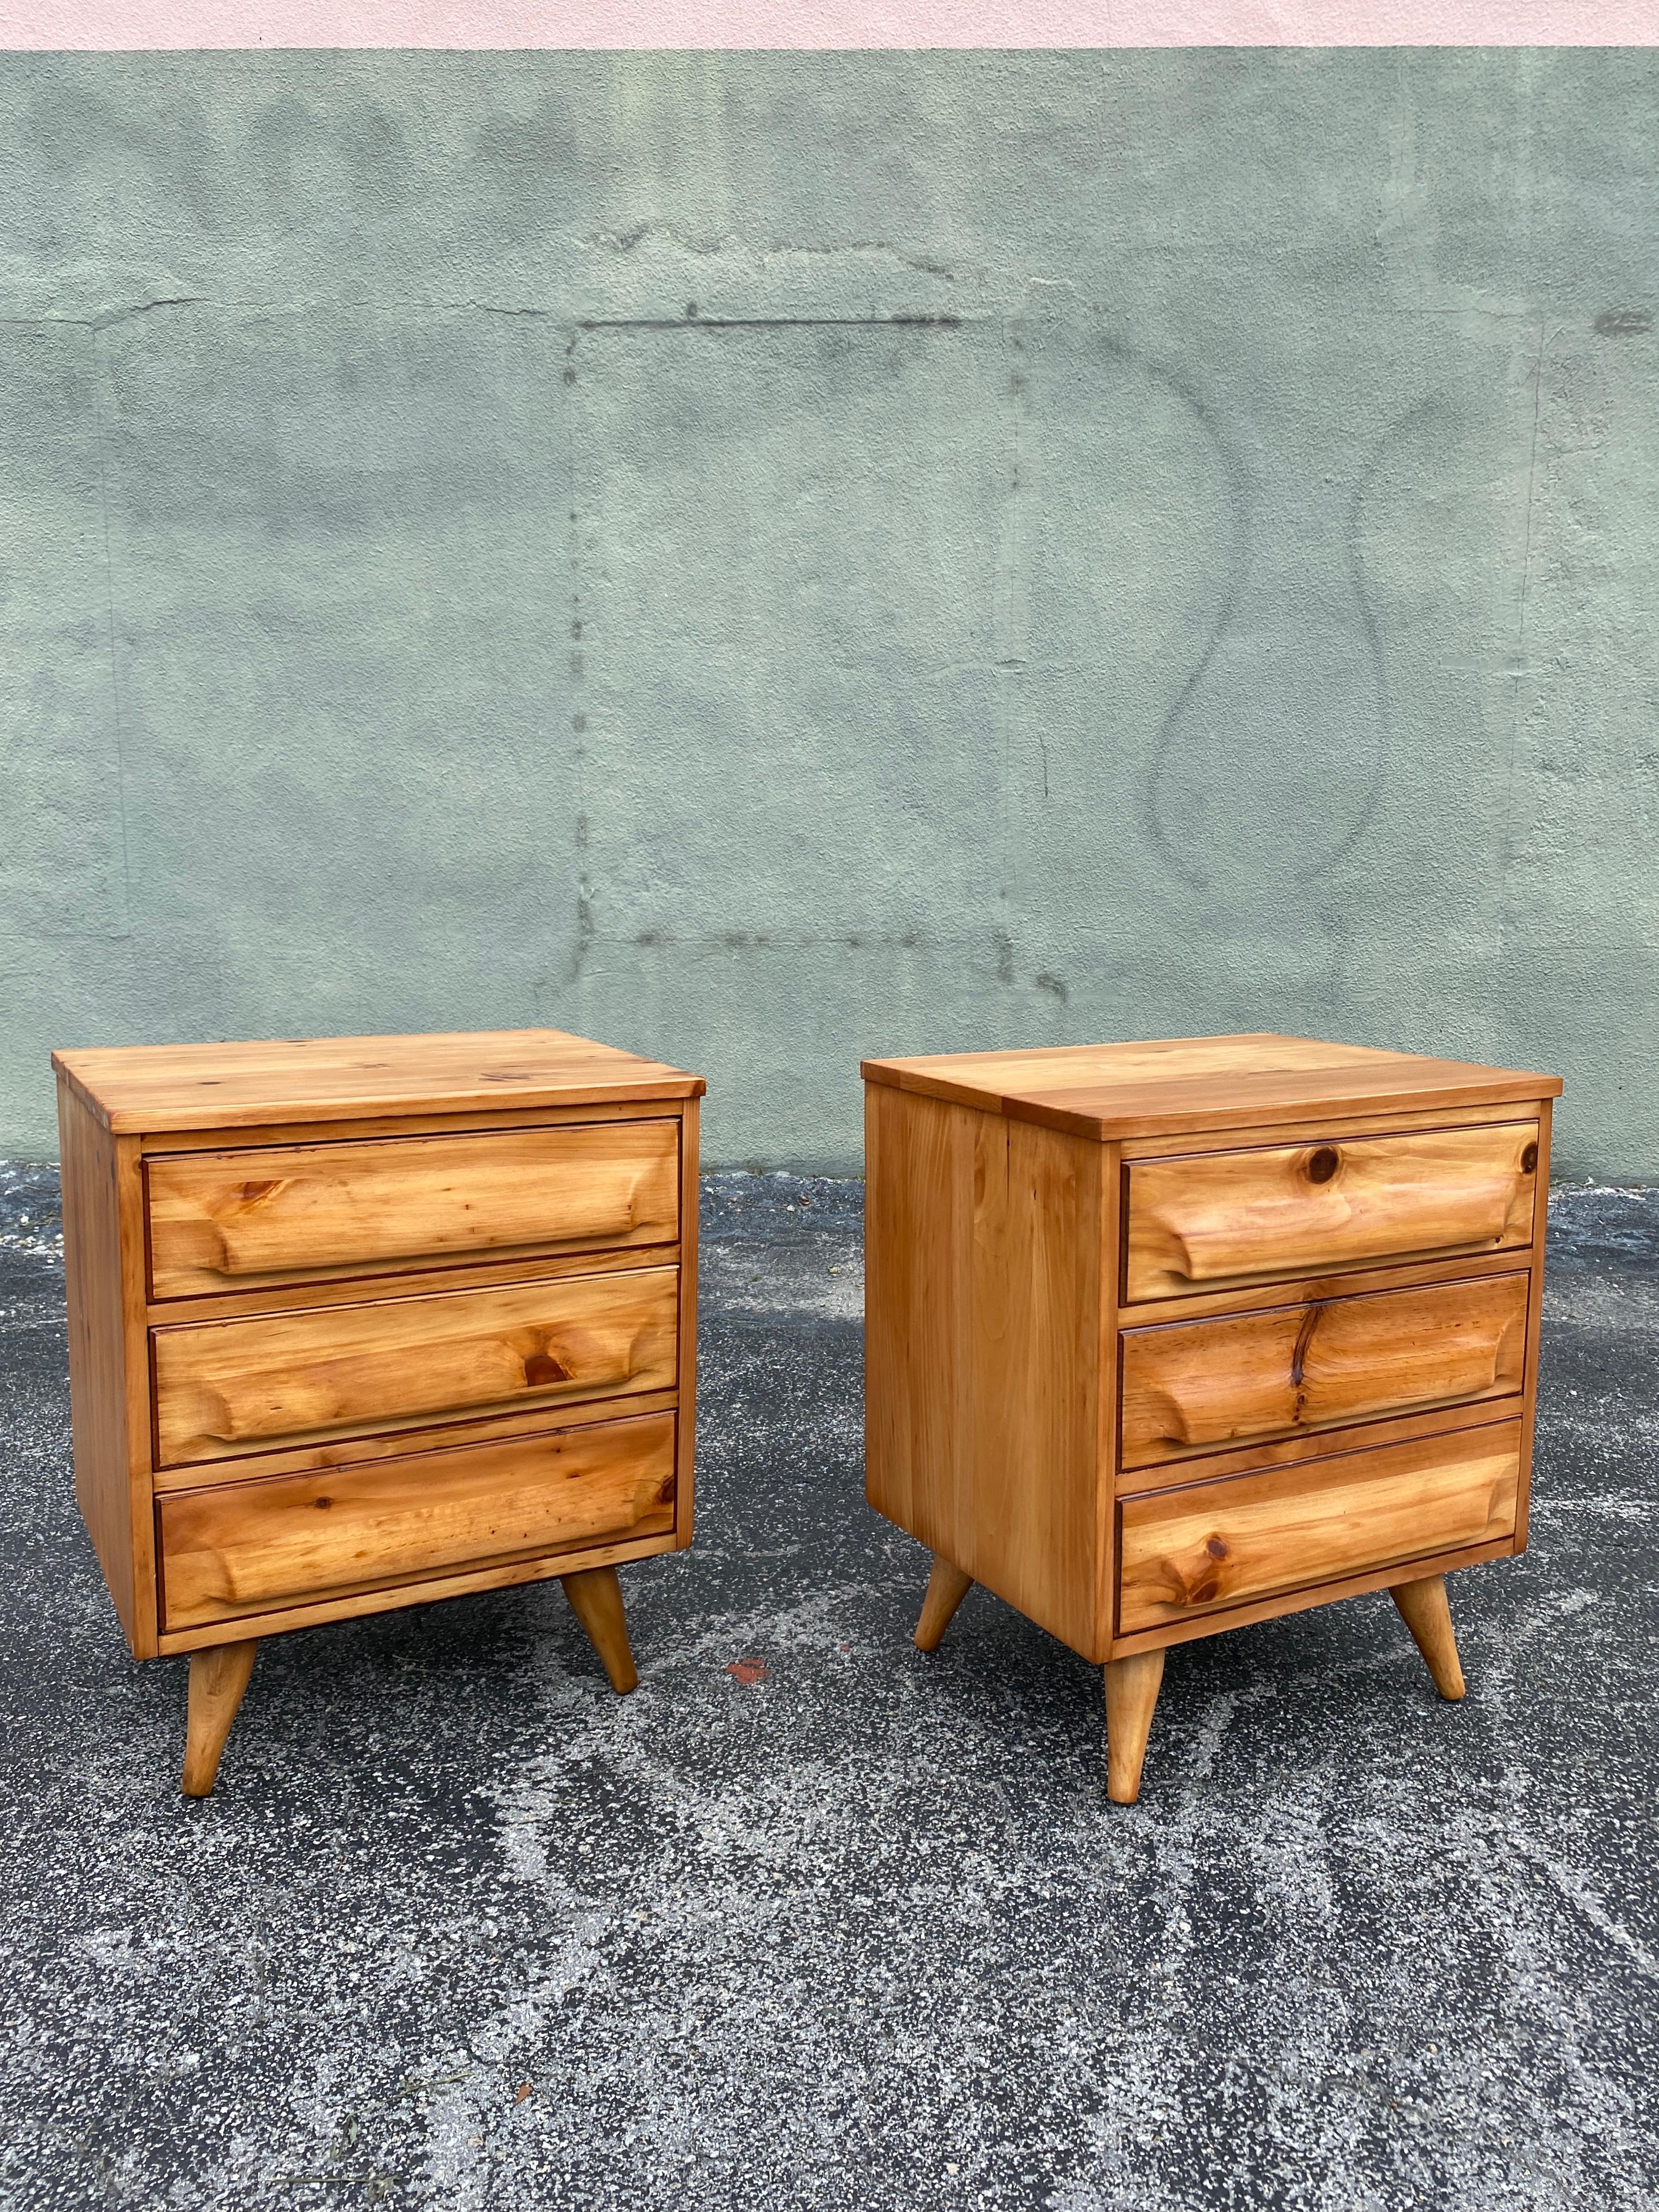 20th Century 1950s Mid-Century Signed Franklin Shockey Sculpted Pine Nightstands - a Pair